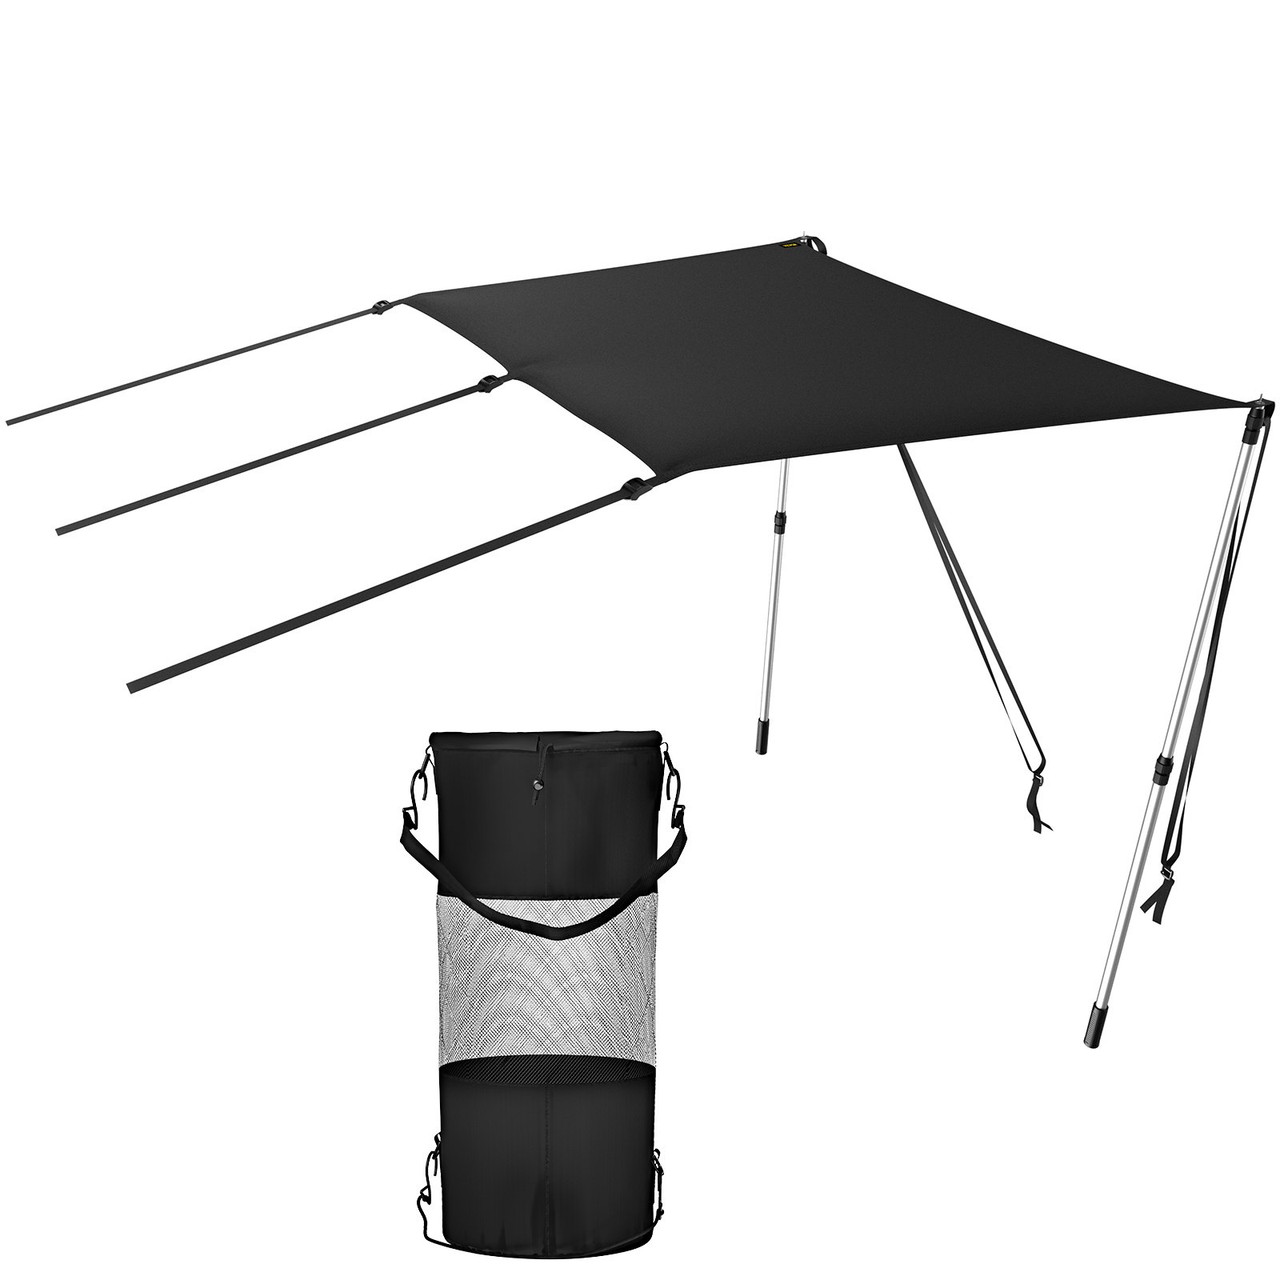 T-top Shade Extension 4'x5' T-top Extension Kit with Telescopic Poles